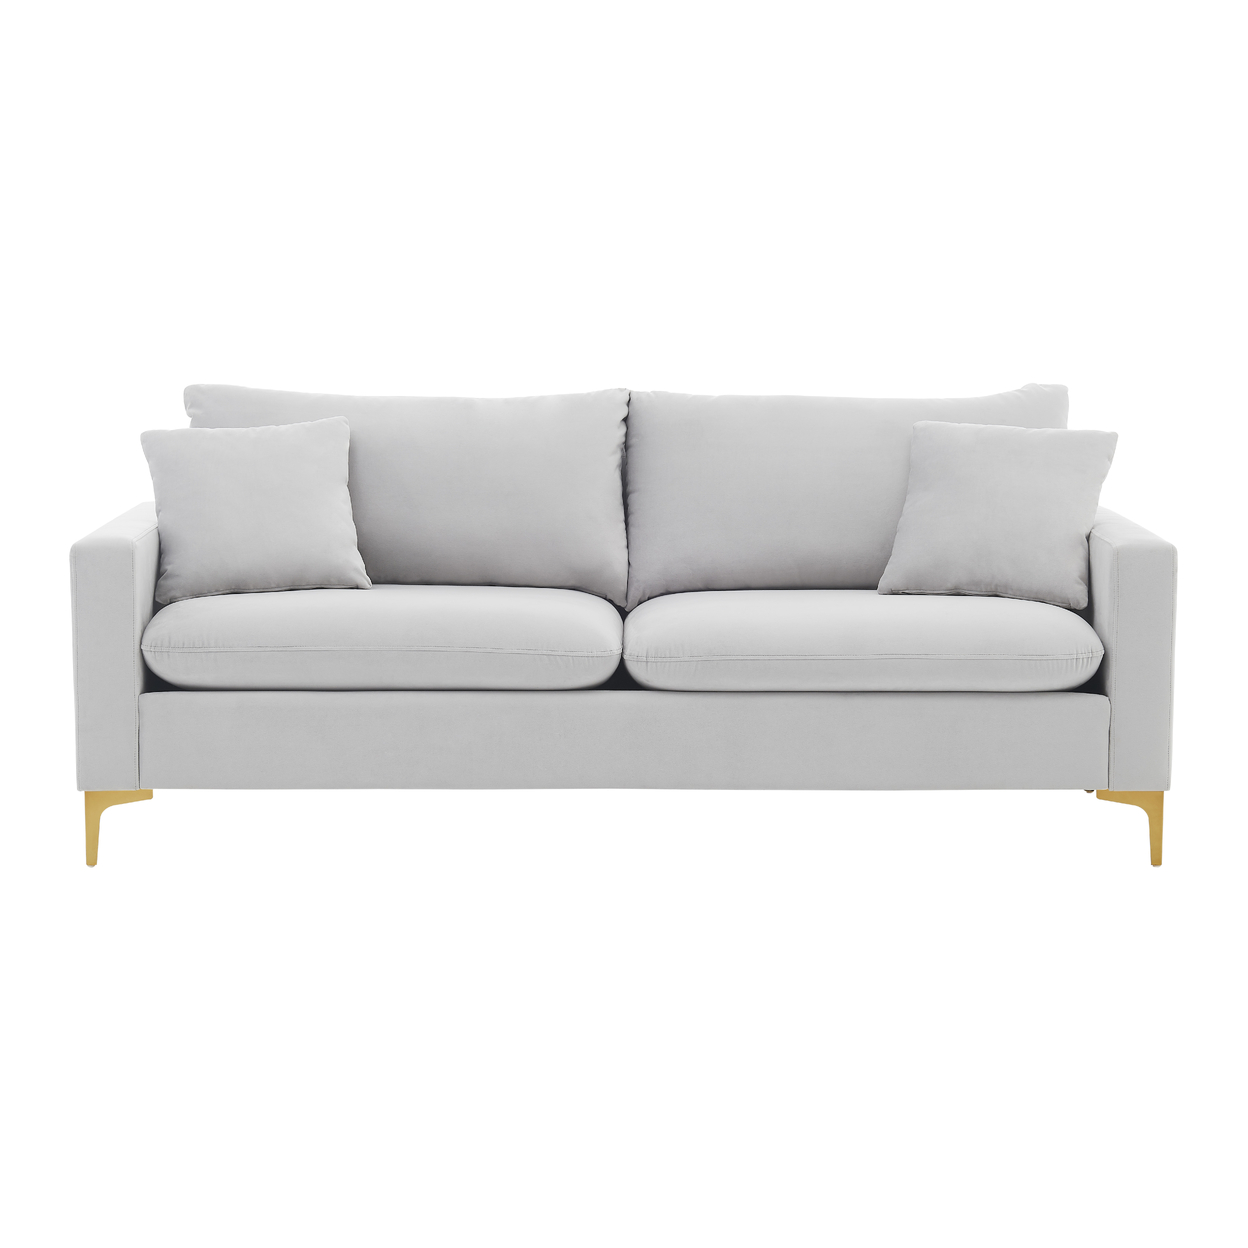 Iconic Home Roxi Sofa Velvet Upholstered Multi-Cushion Seat Gold Tone Metal Y-Legs With 2 Decorative Pillows - Silver